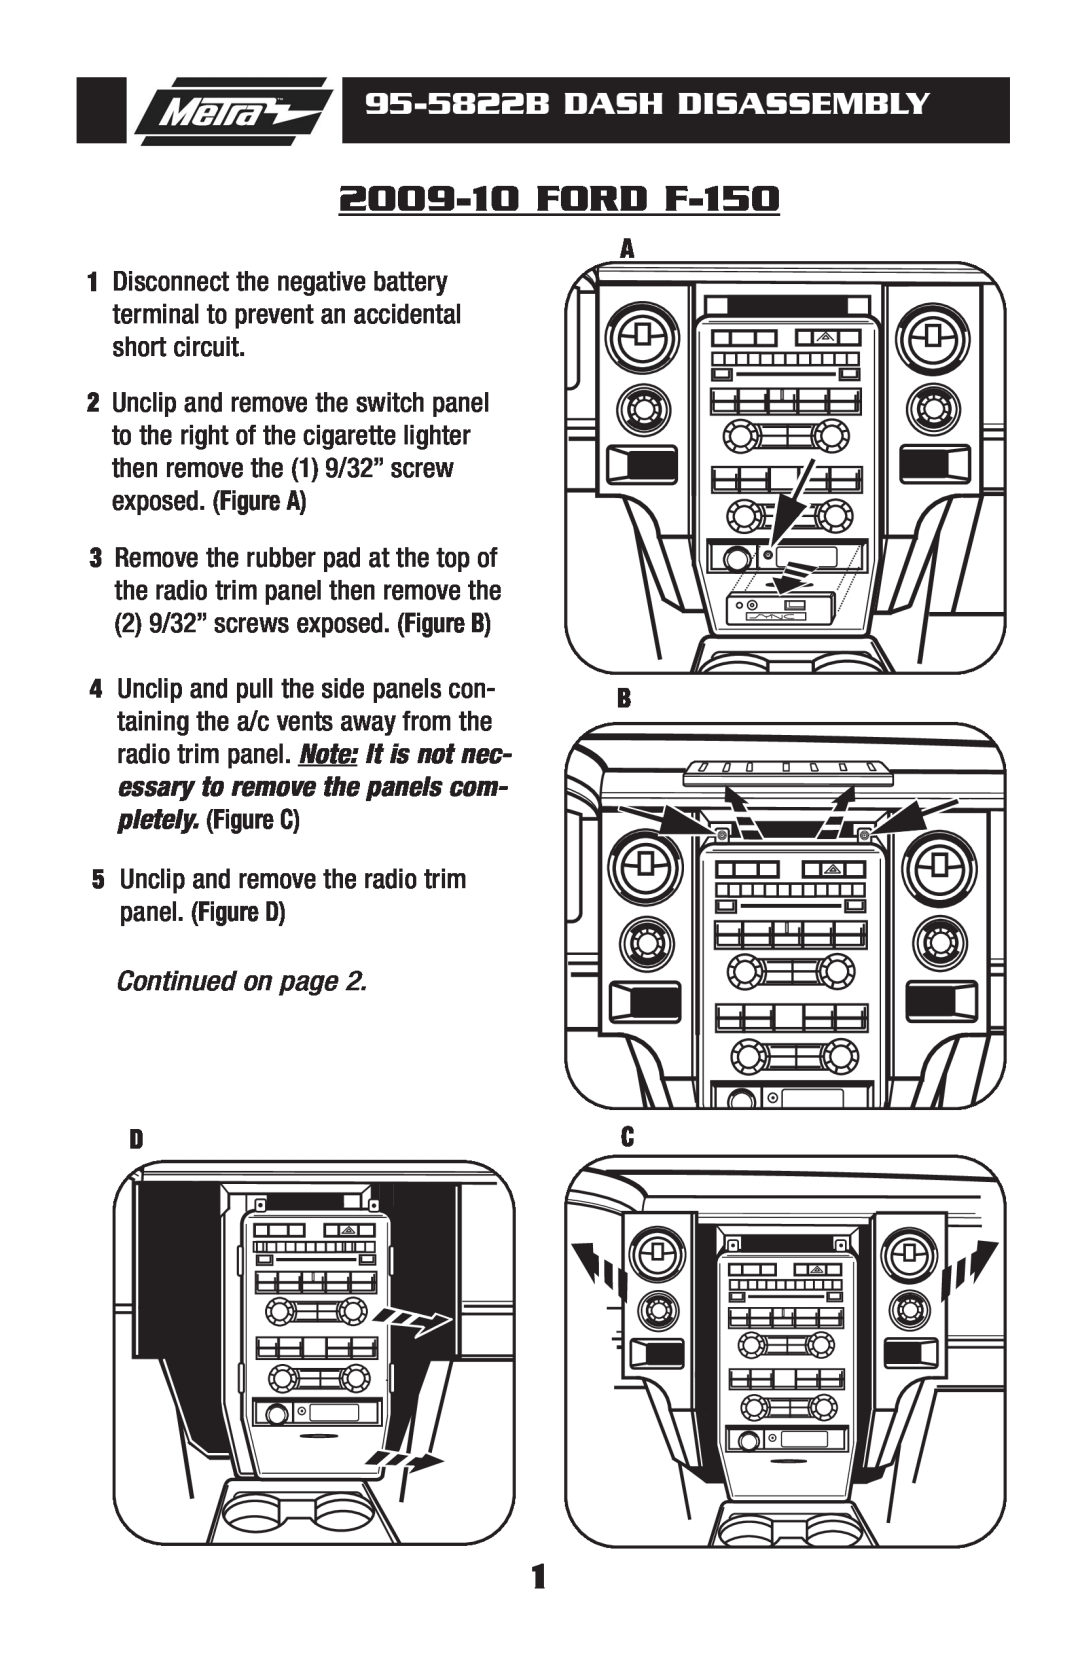 Metra Electronics 955822 installation instructions FORD F-150, 95-5822B DASH DISASSEMBLY, Continued on page 